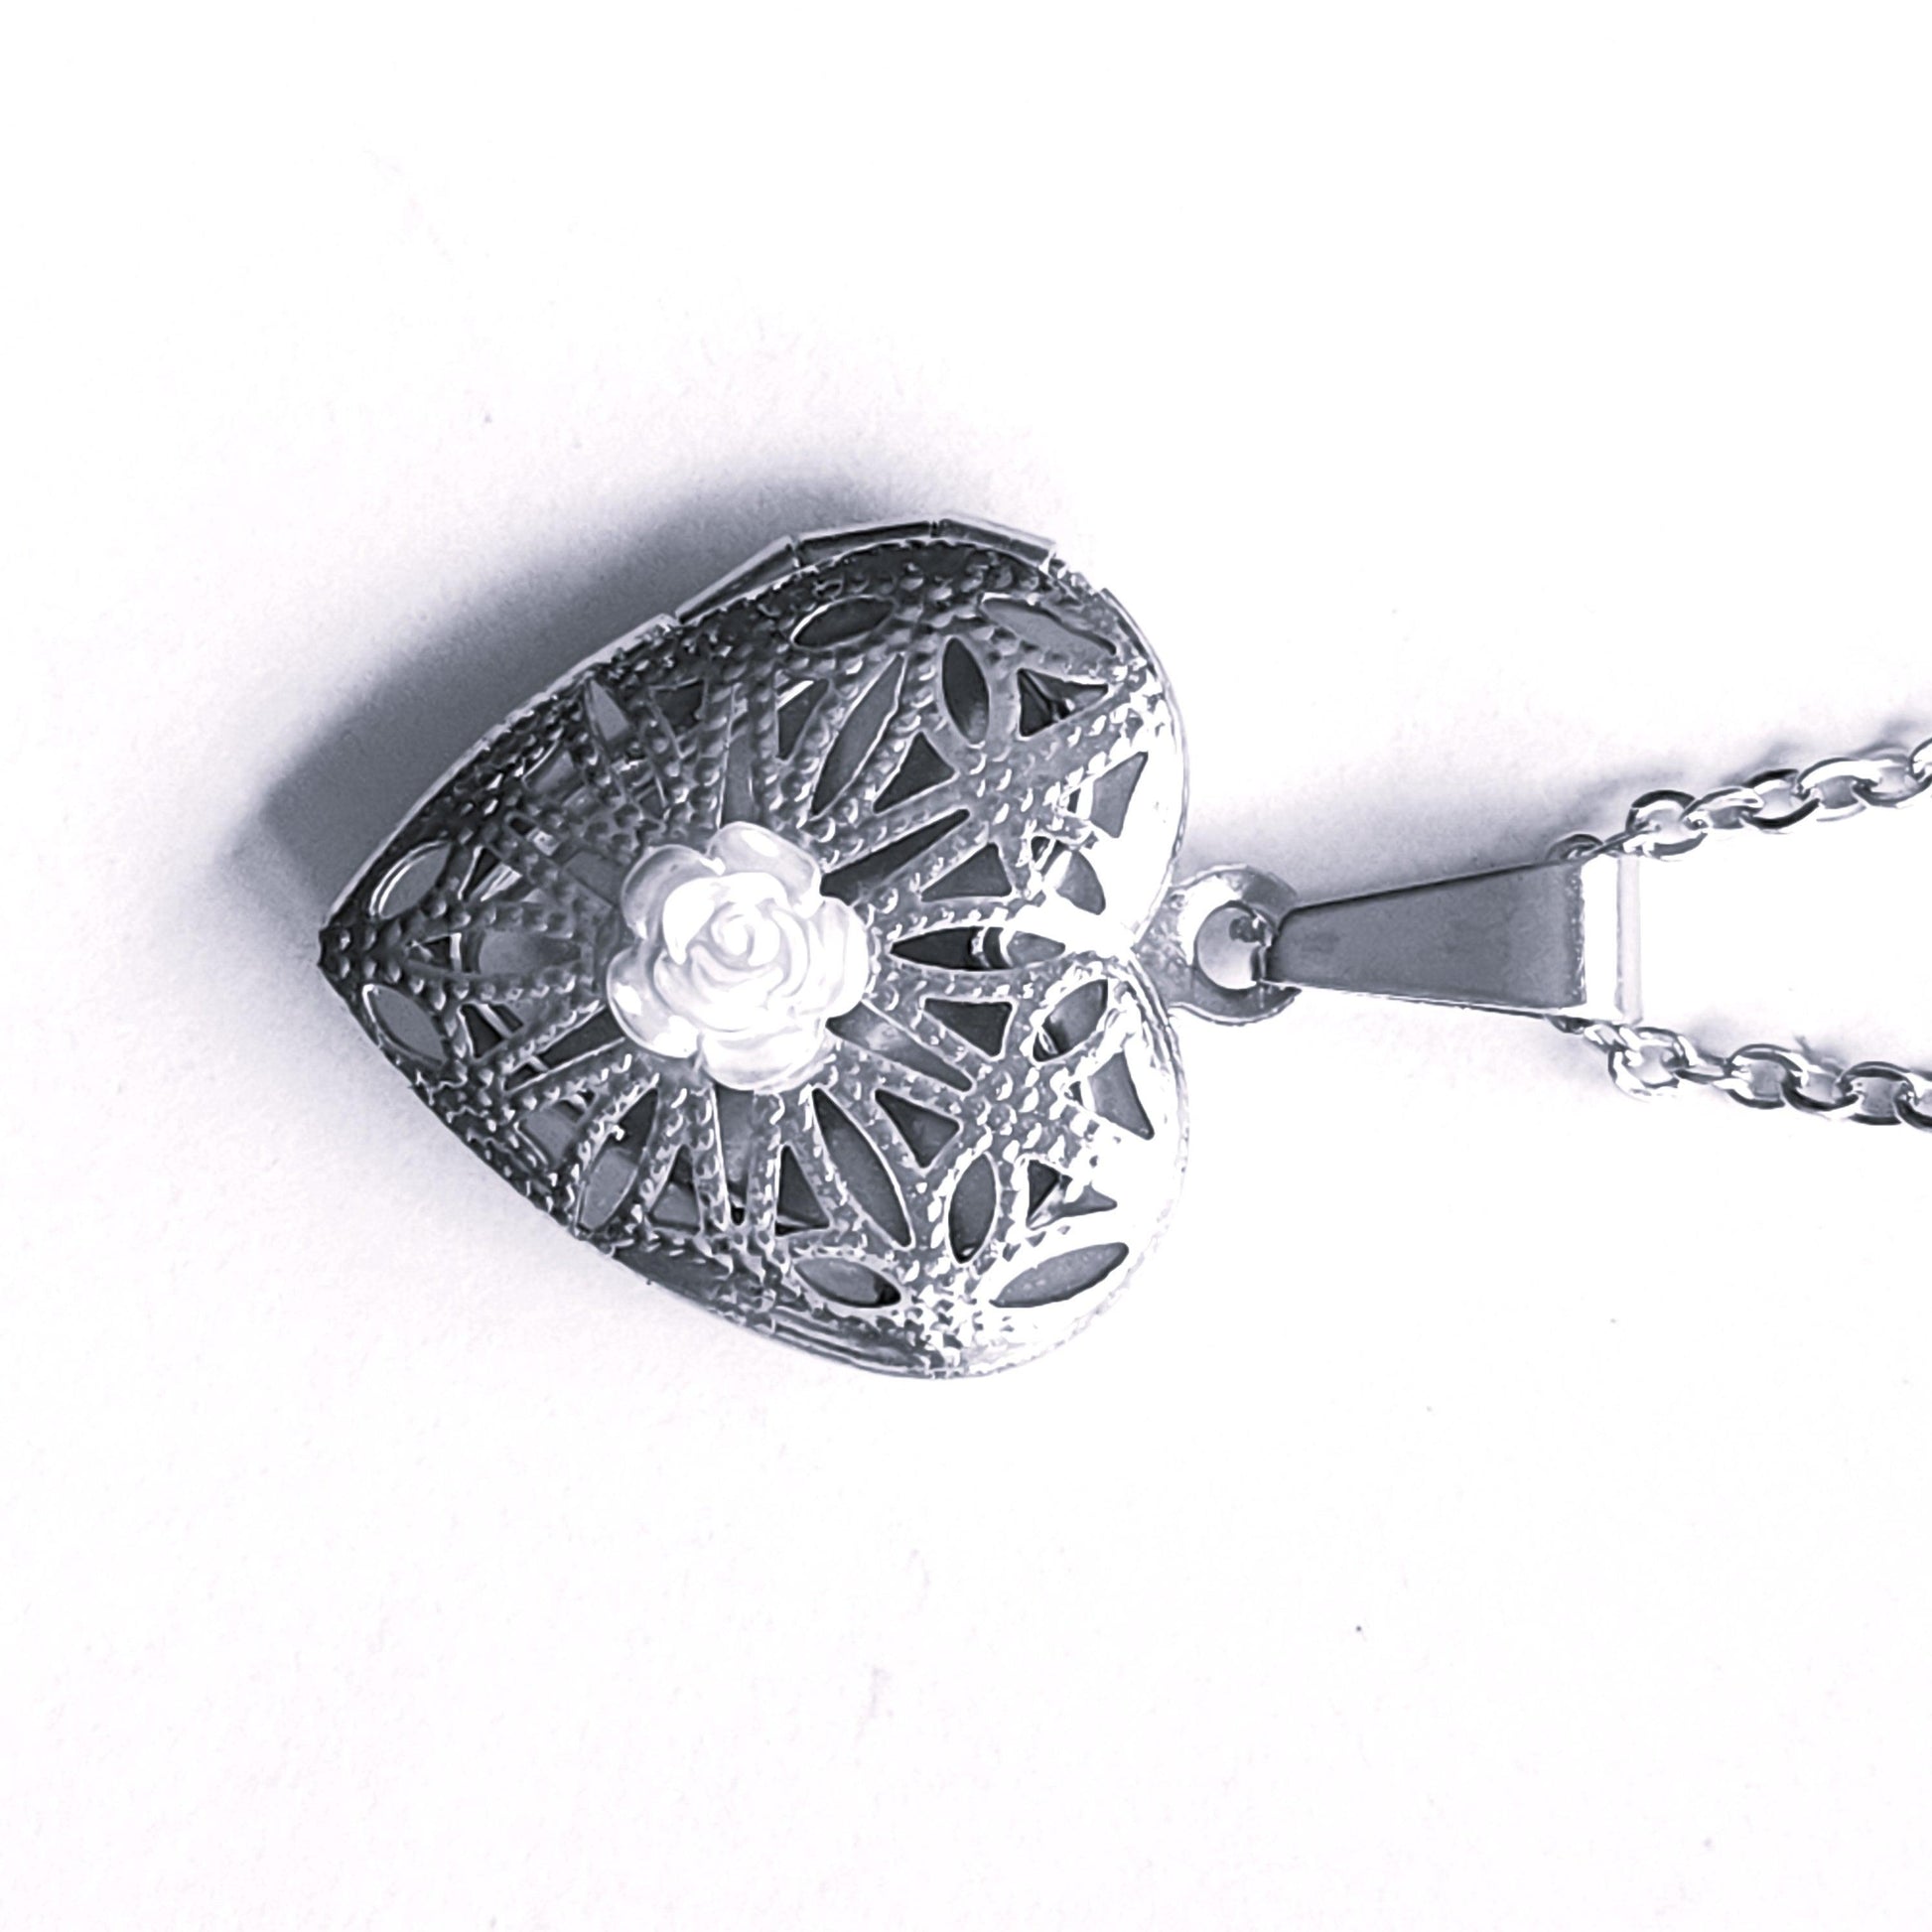 Heart of Remembrance Cremation Pendant - White Rose